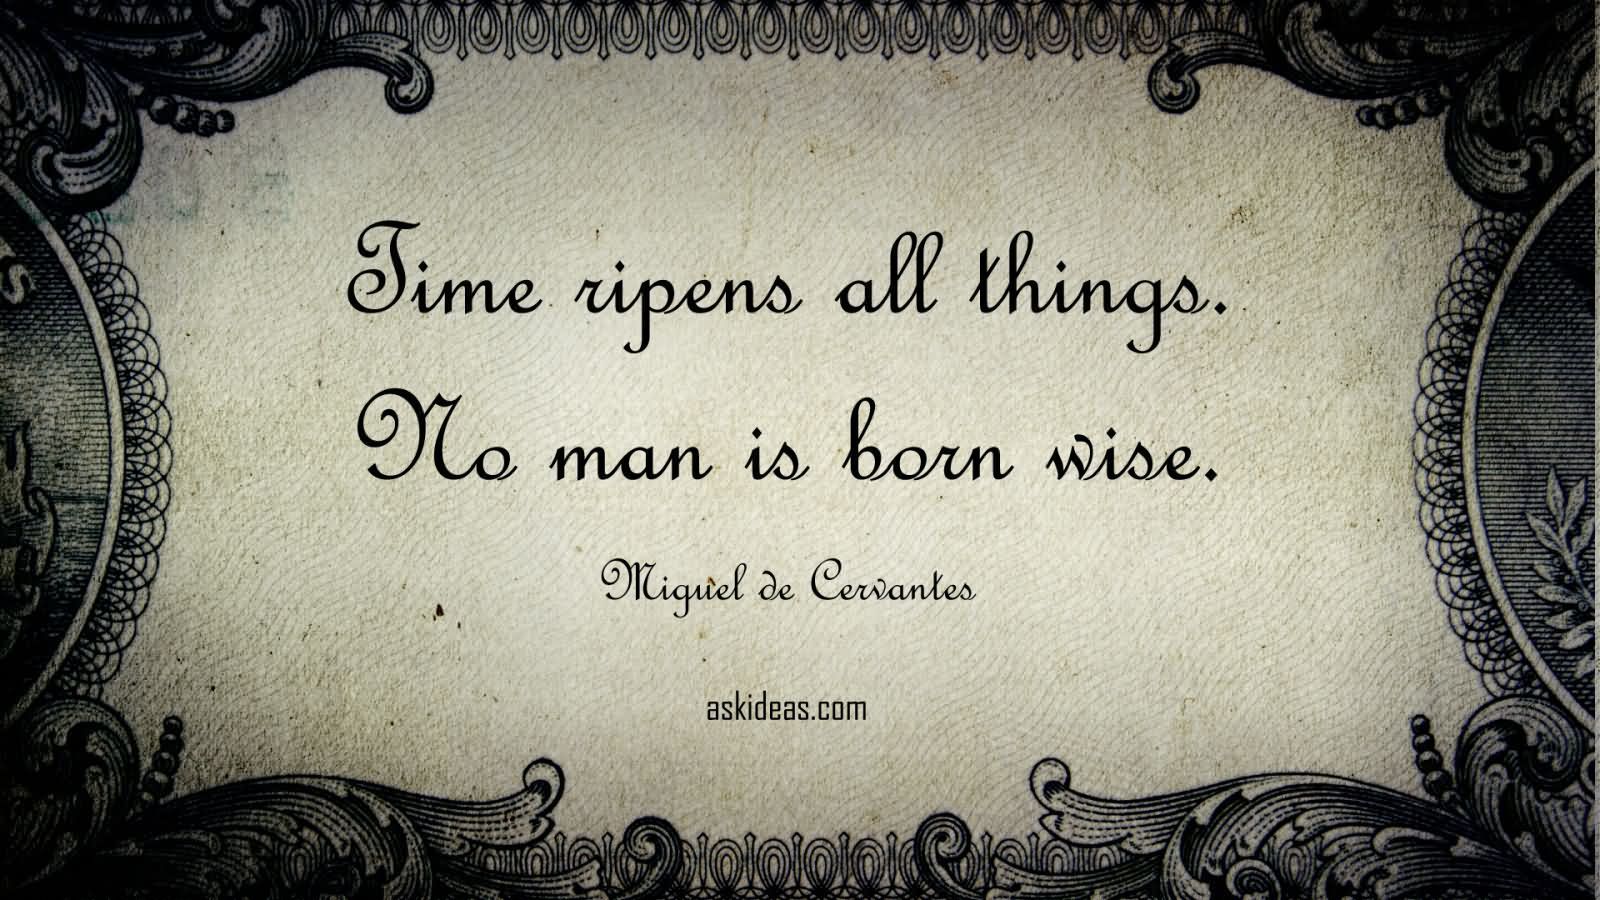 Time ripens all things. No man is born wise.